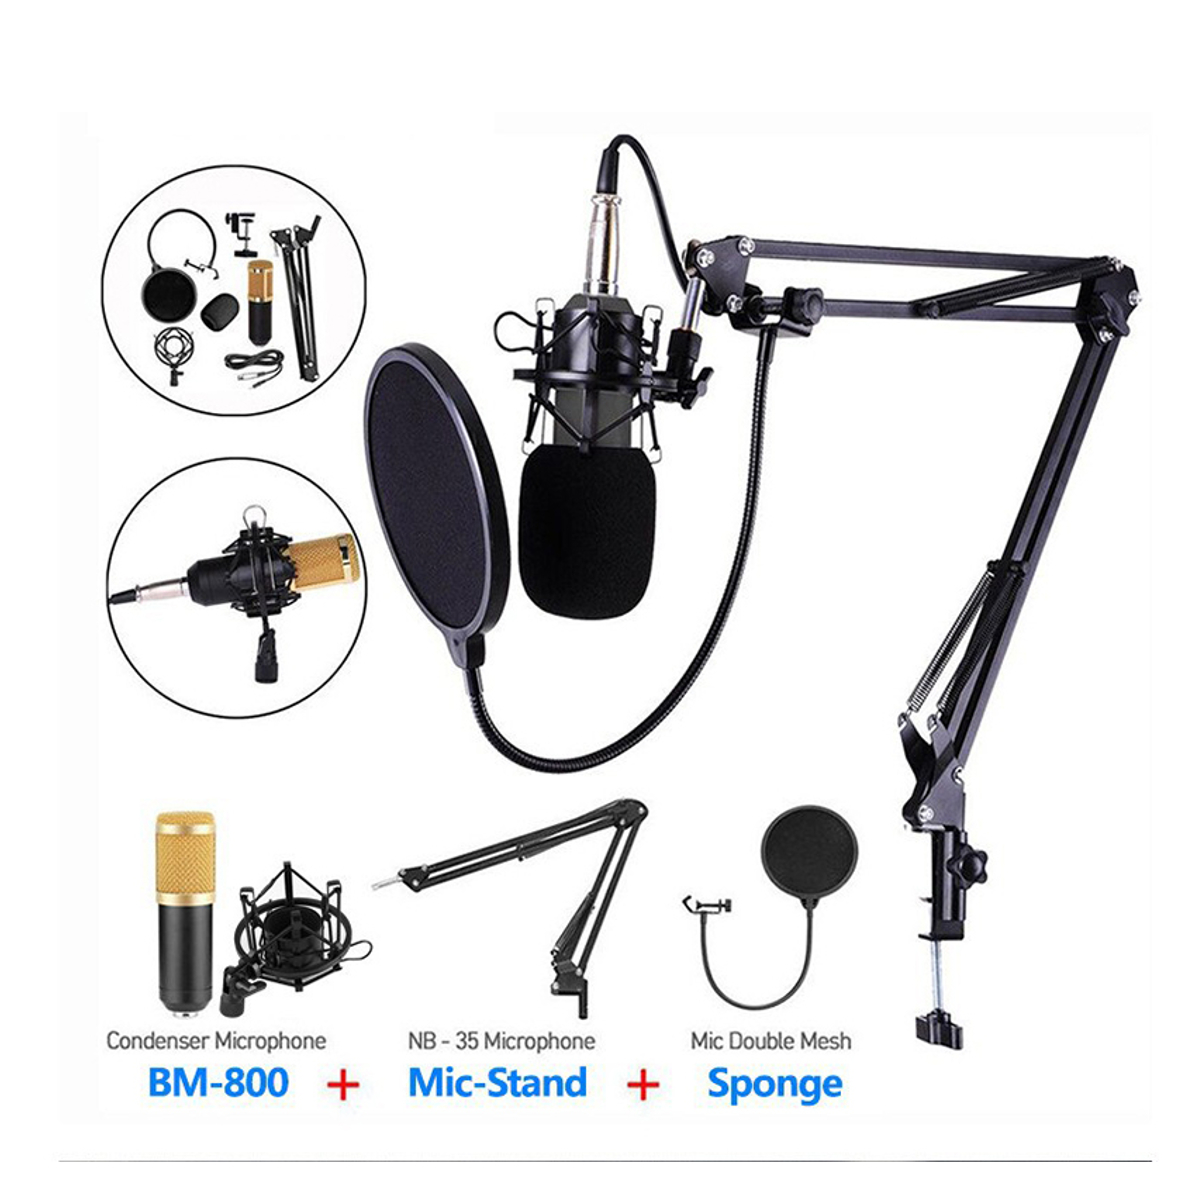 Condenser-Microphone-with-Live-Studio-Sound-Card-Recording-Mount-Boom-Stand-Mic-Kit-for-Live-Broadca-1749823-5